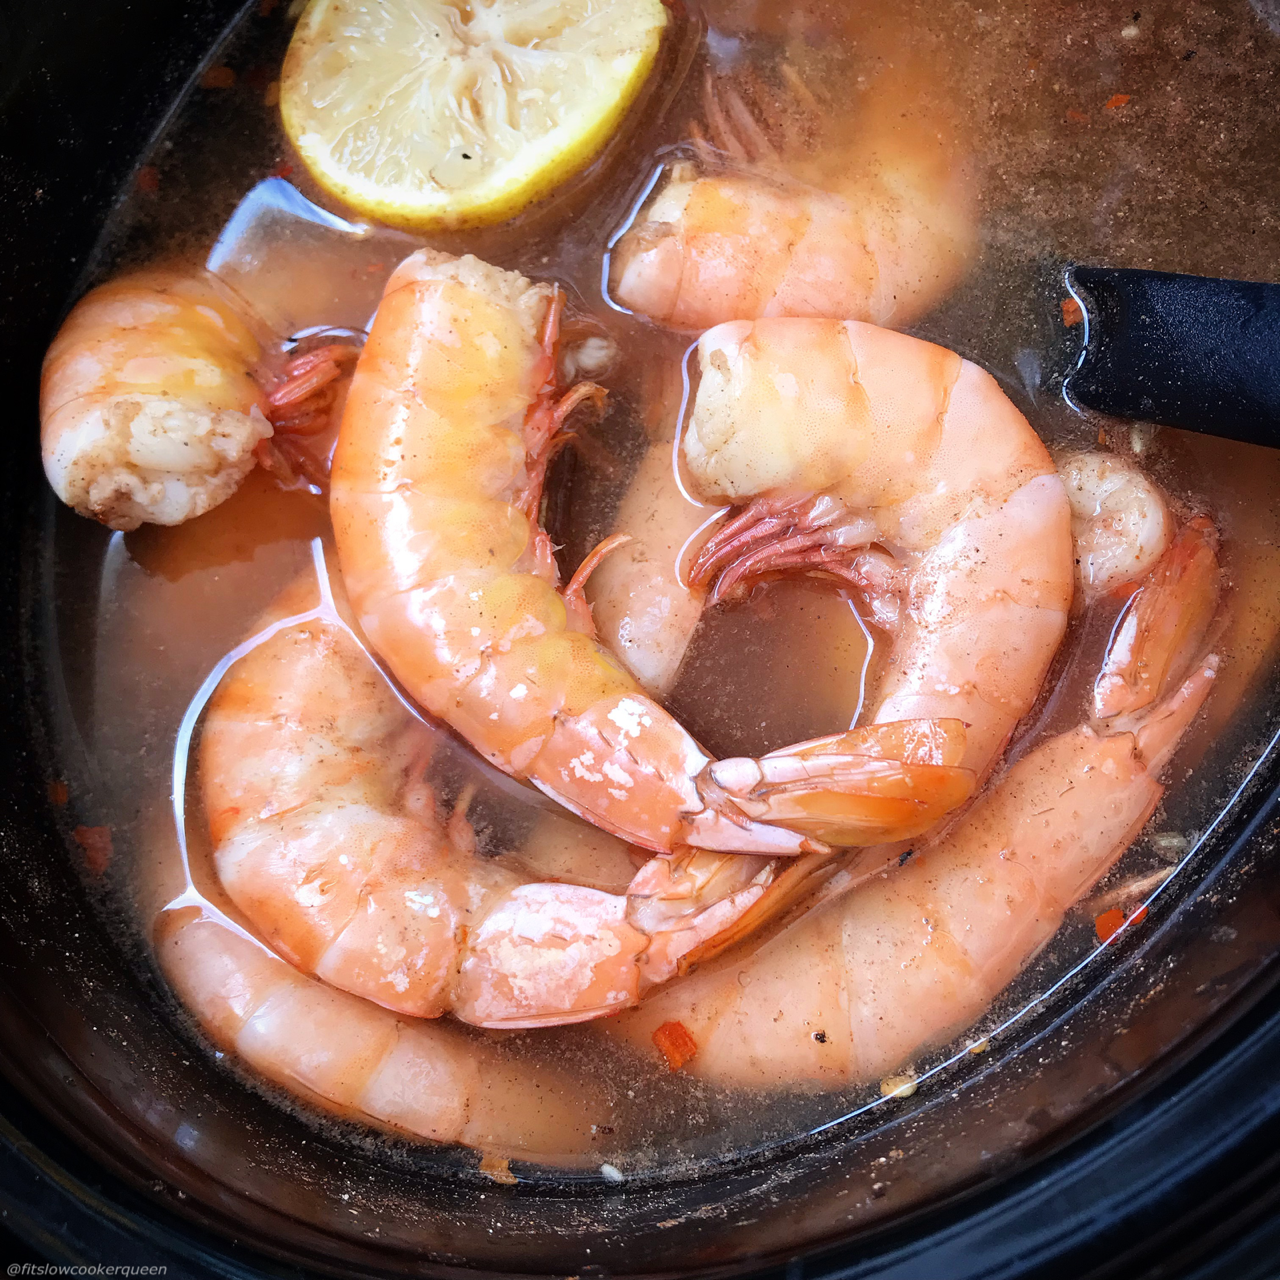 Peel and Eat shrimp are an easy, healthy appetizer or snack. This slow cooker version uses a homemade Old Bay seasoning and cooks in just an hour.